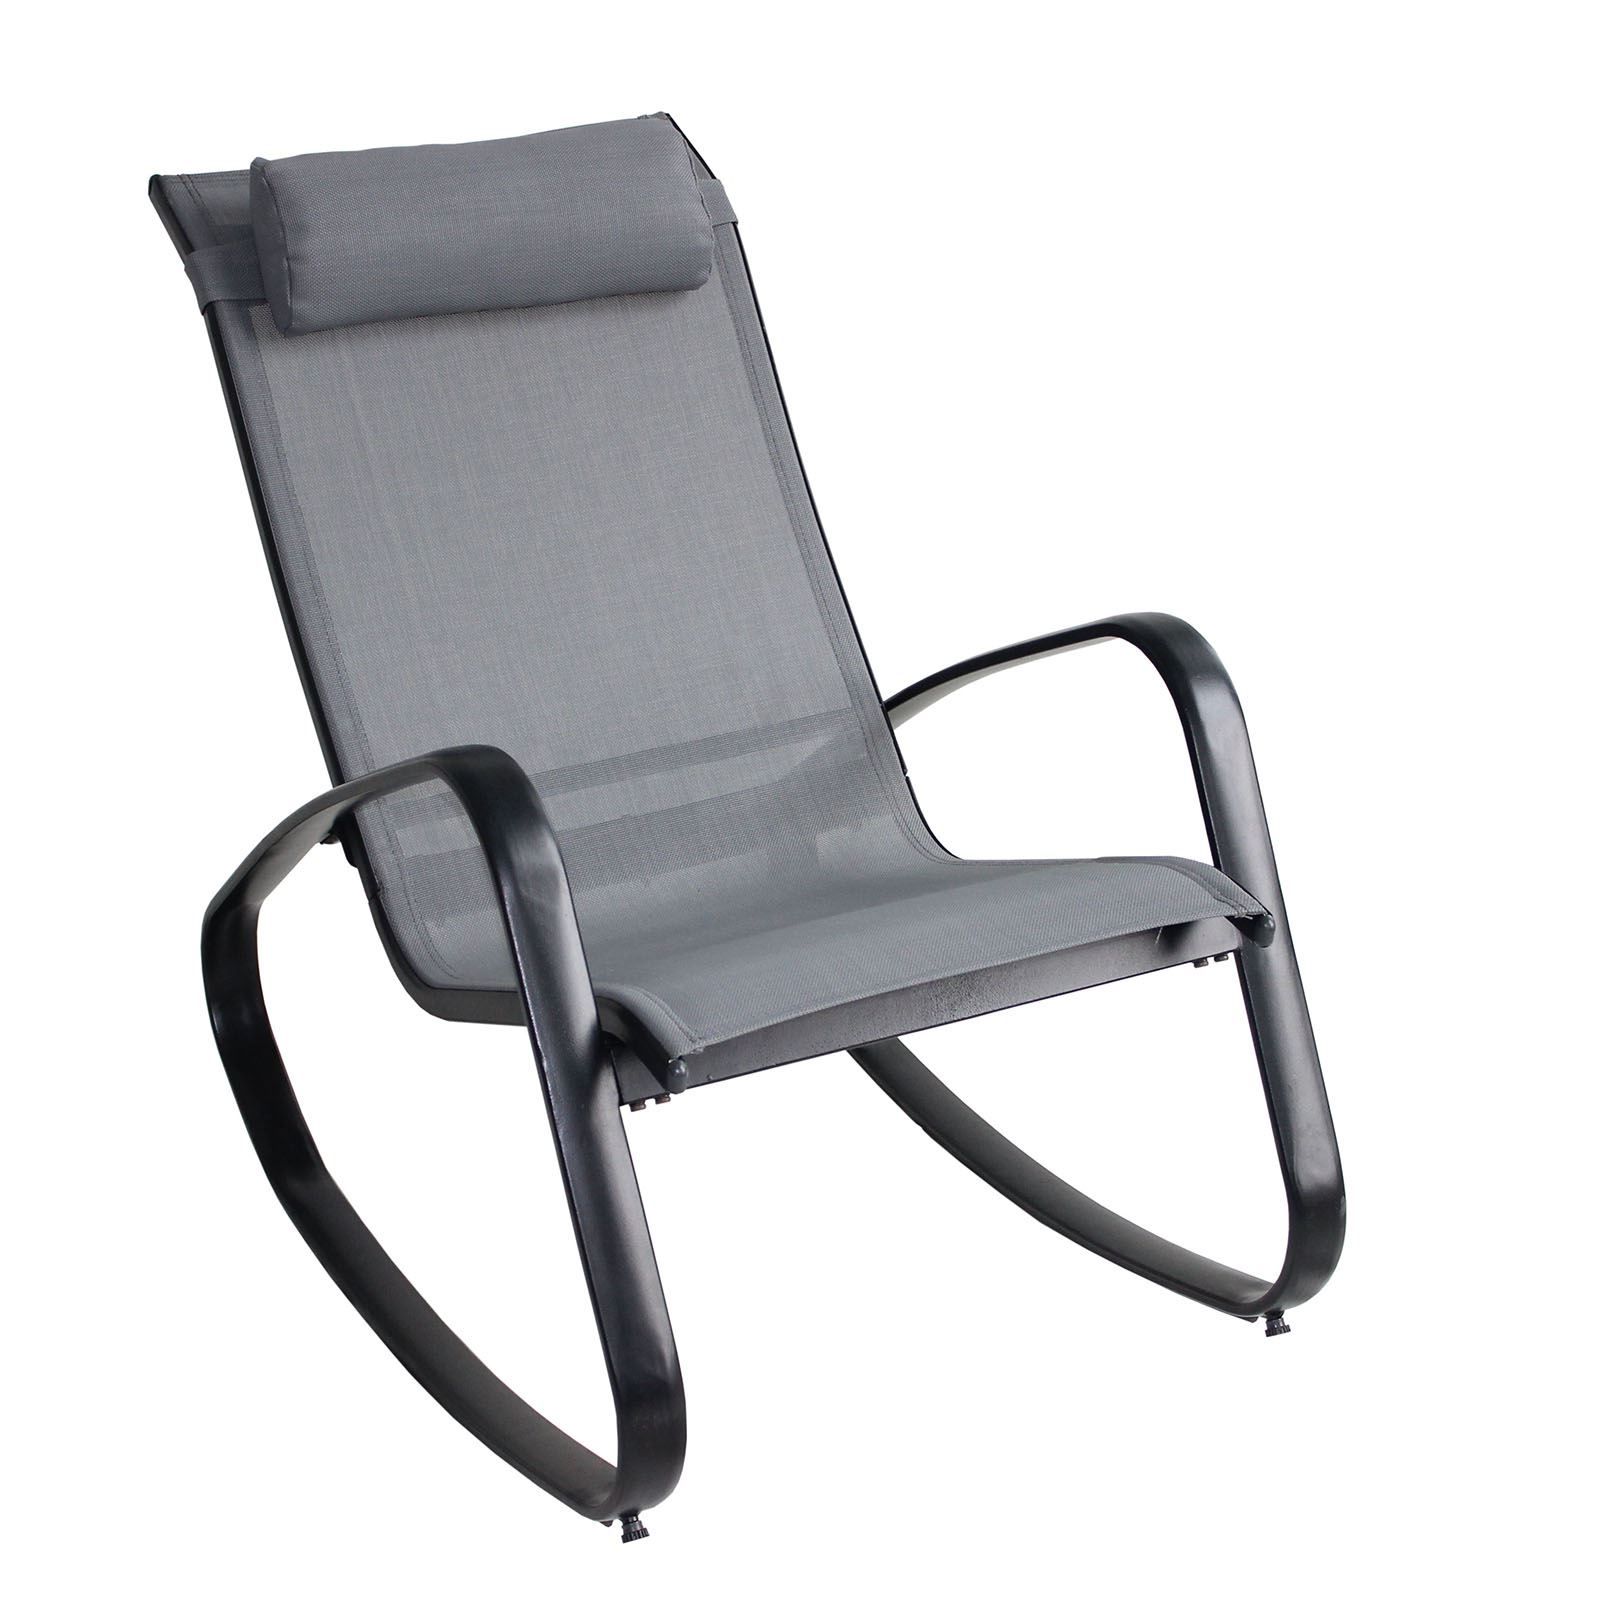 Details About Azuma Seconds Garden Rocking Chair Patio Lounger Grey Relaxer  Seat Outdoor With Recent Outdoor Rocking Loungers (View 3 of 25)